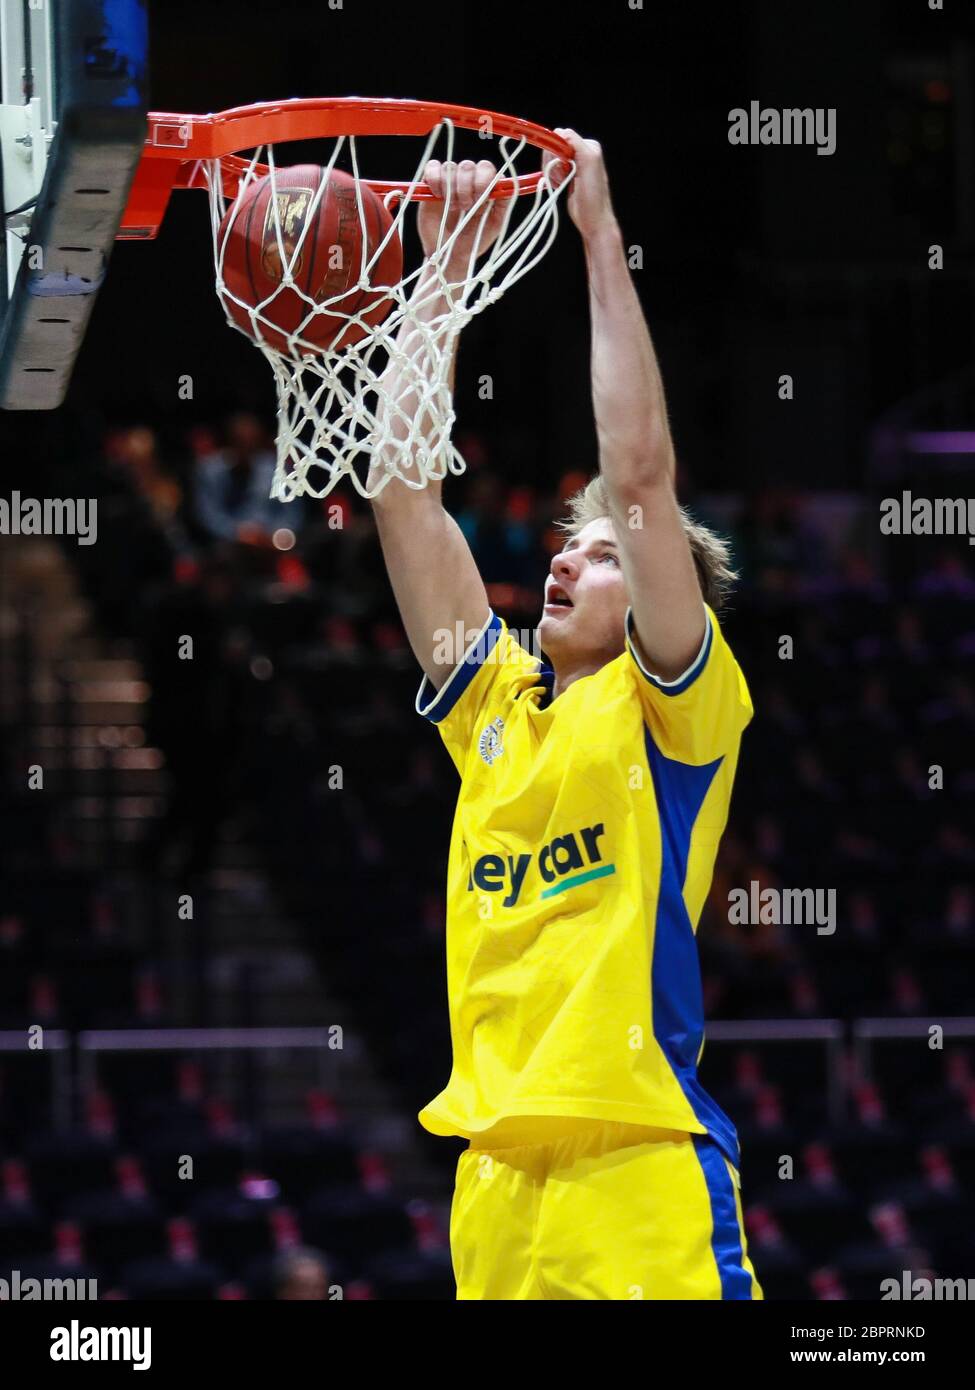 Braunschweig, Germany, December 27, 2019:Jannik Gottsche in action during the warmup session before the Basketball BBL Bundesliga match Stock Photo